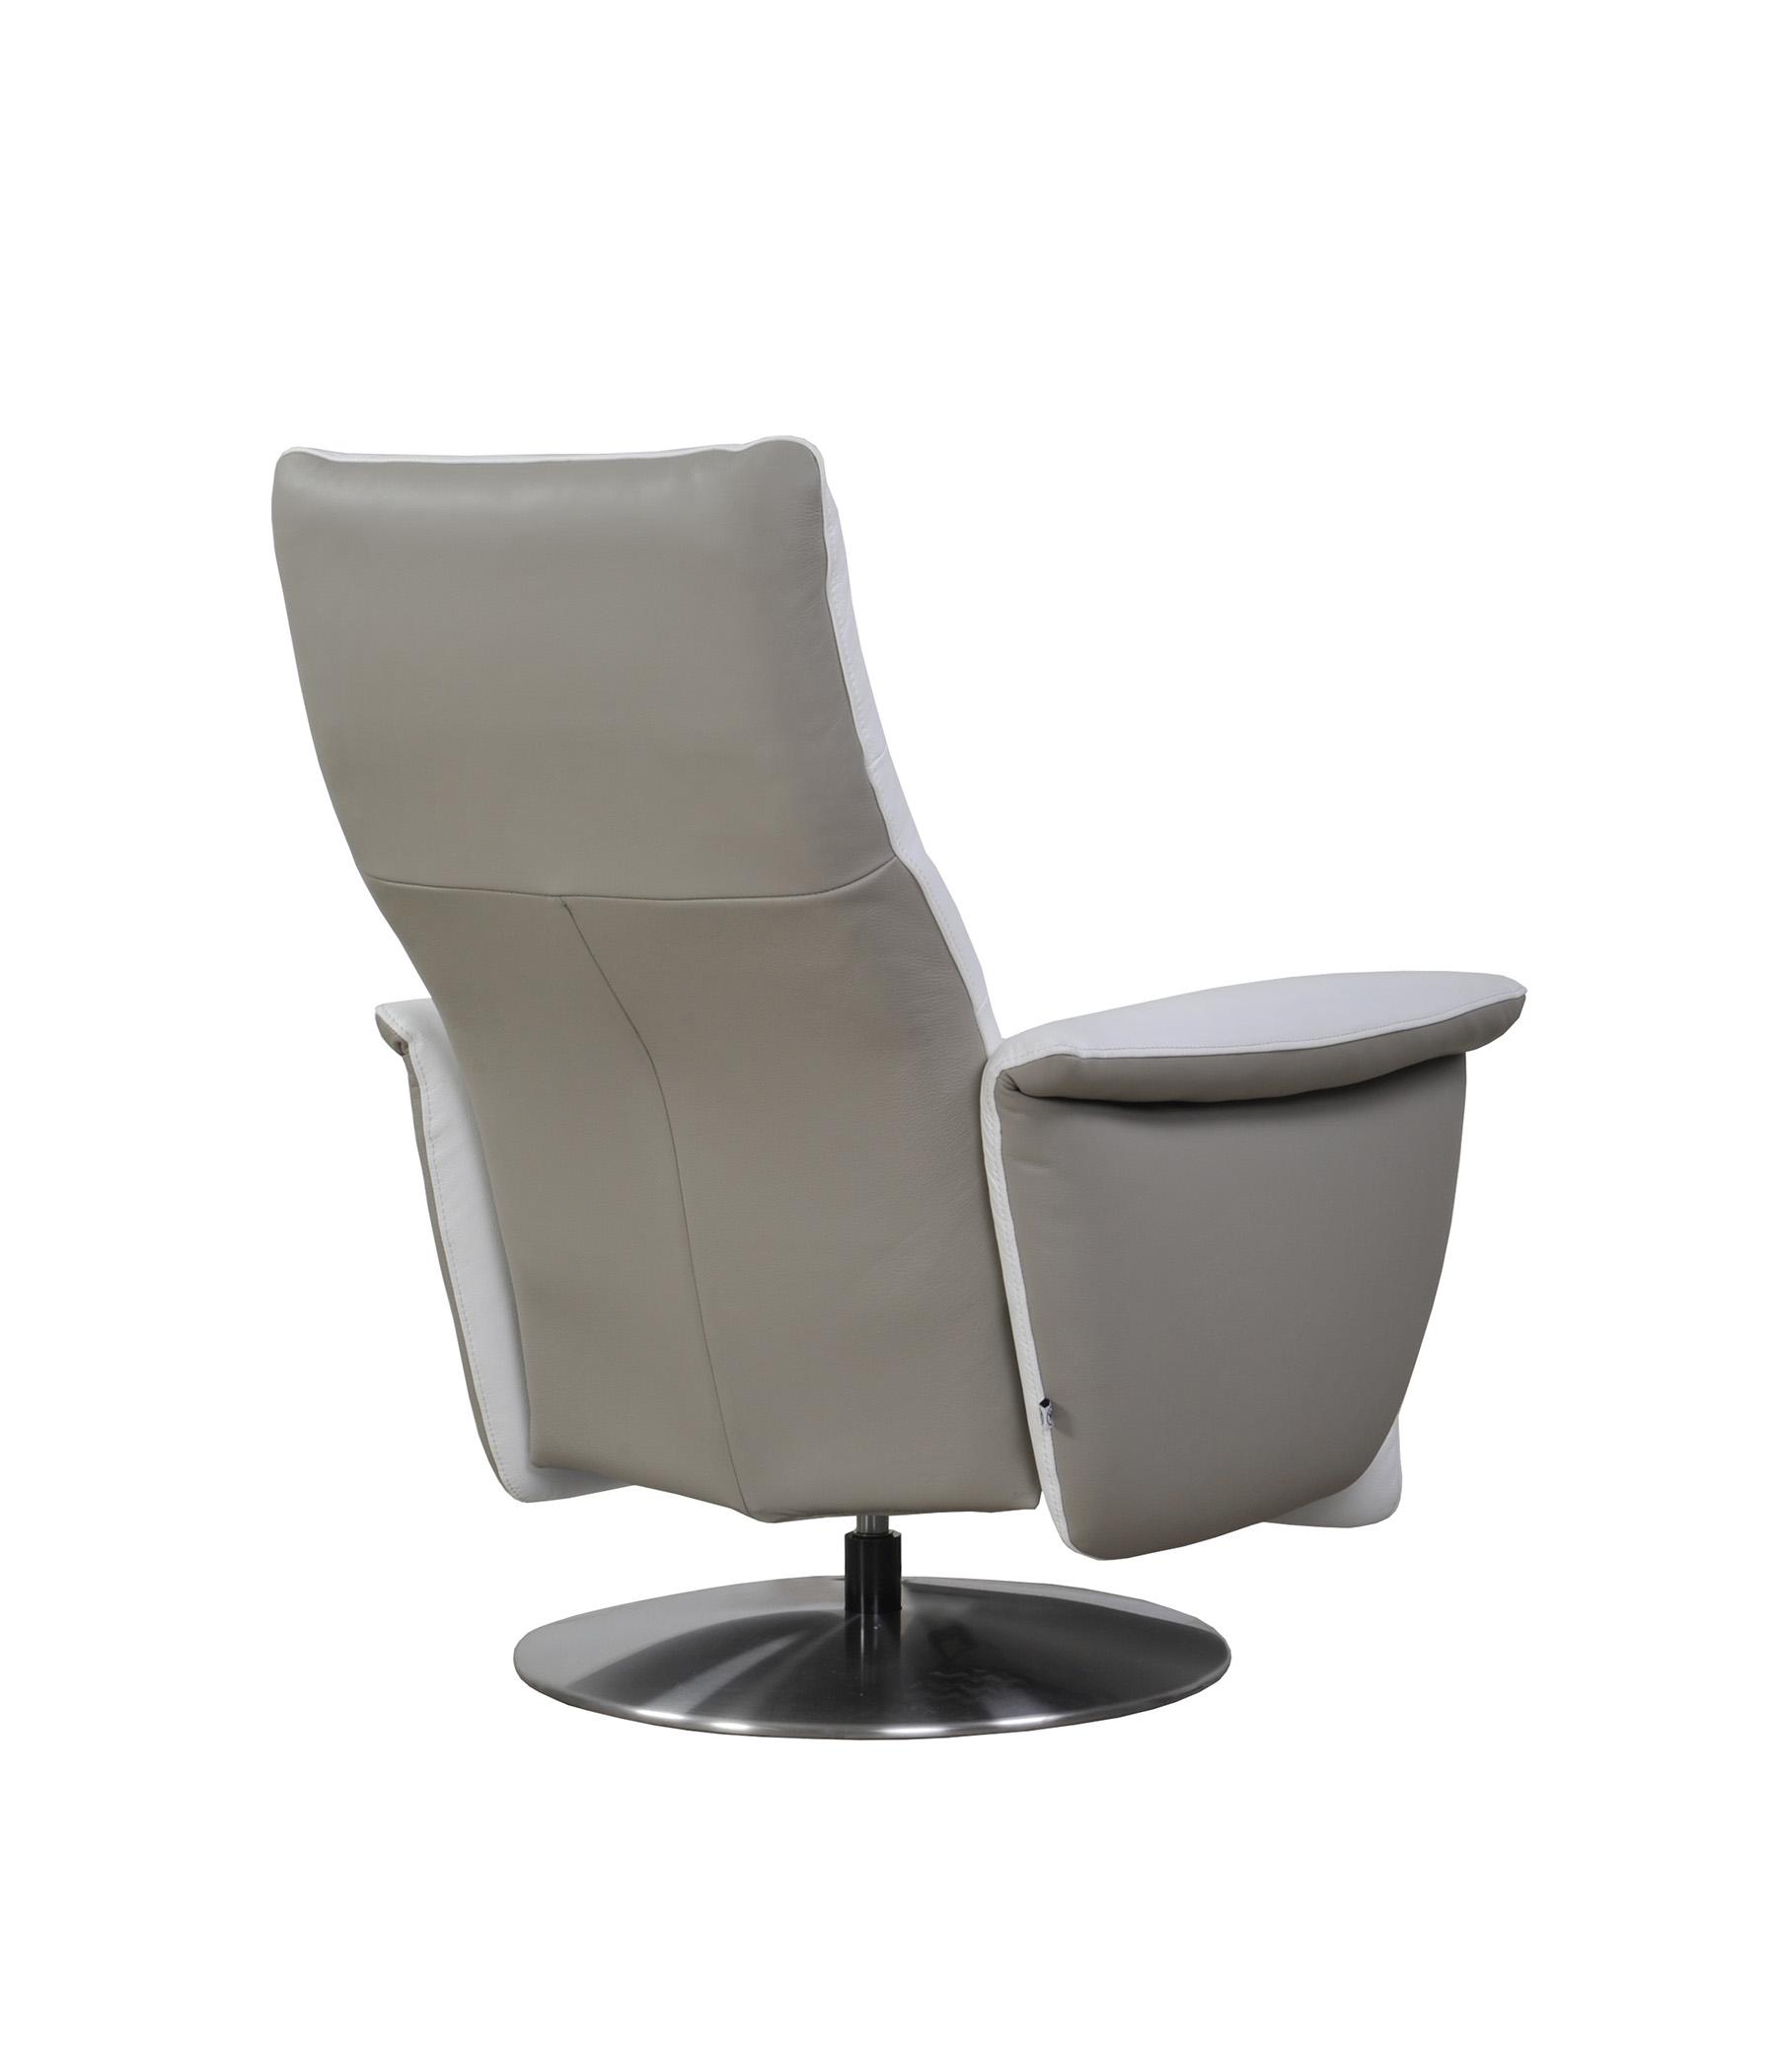 

                    
Moroni 279 Oslo Arm Chairs White Top grain leather Purchase 
